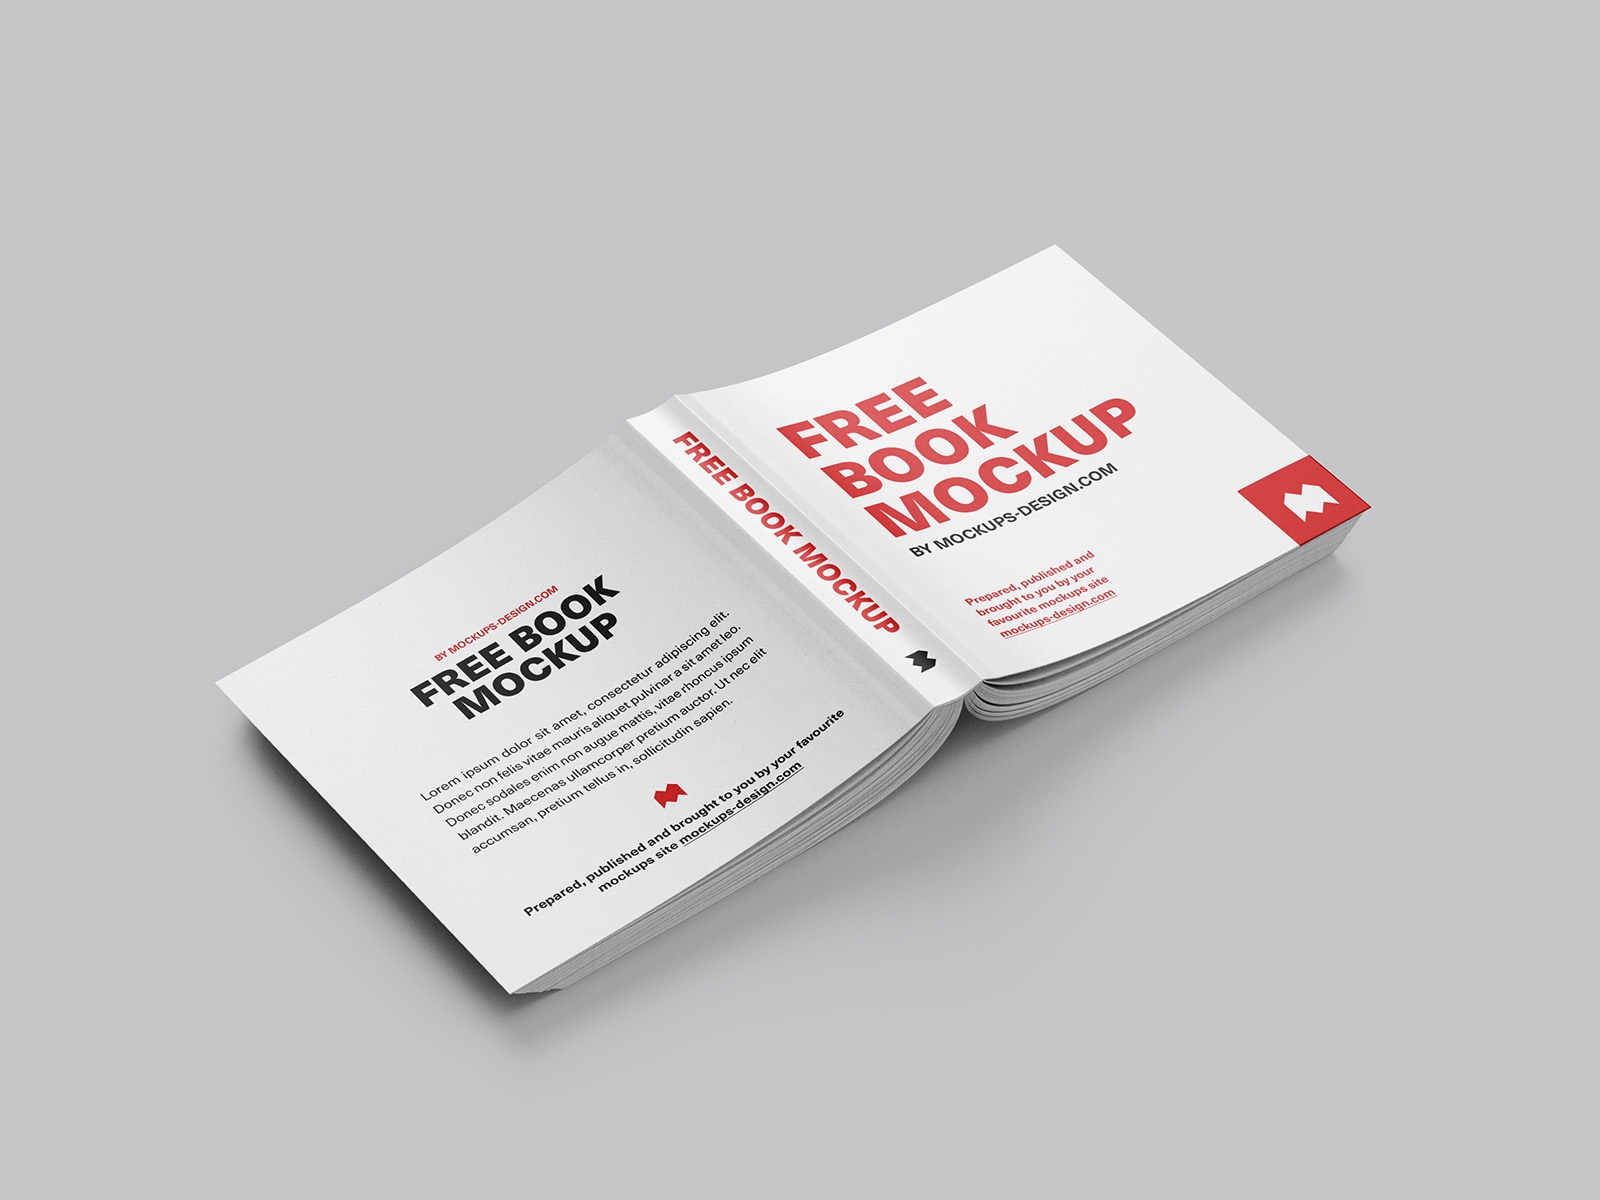 7 Square Book Mockups in Various Shots FREE PSD